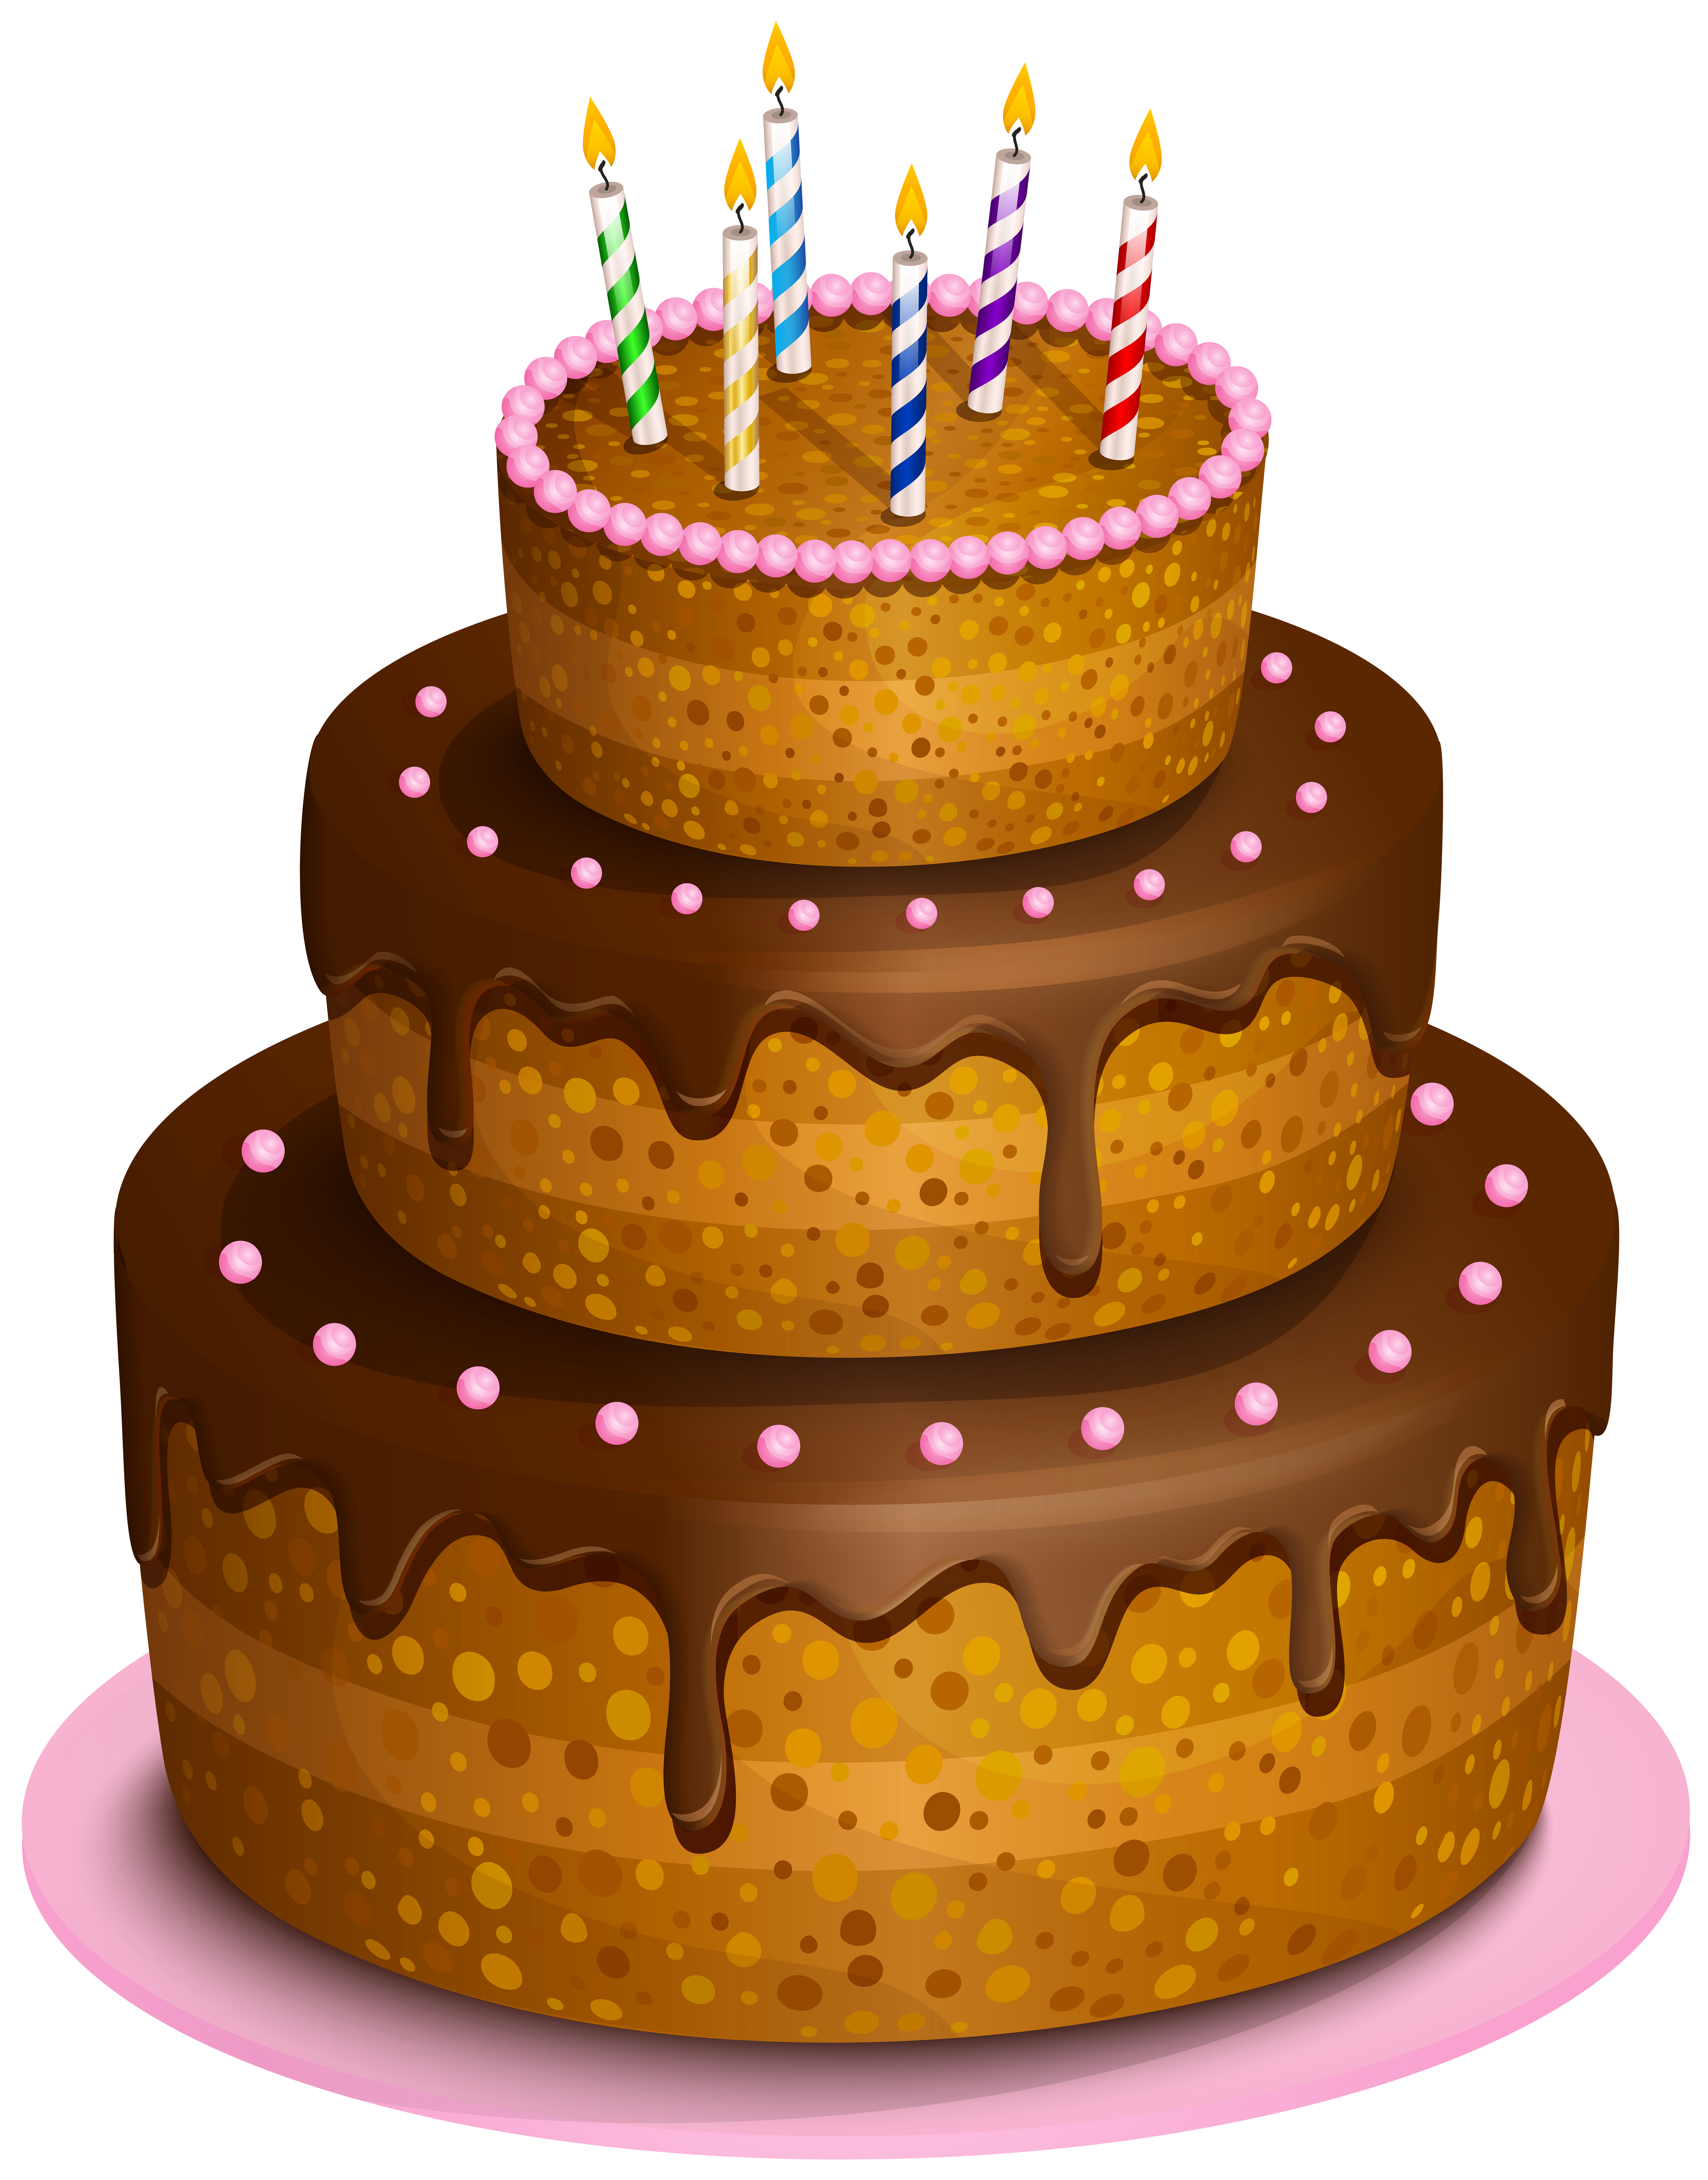 birthday cake transparent png clip art image gallery yopriceville high quality images and transparent png free clipart gallery yopriceville